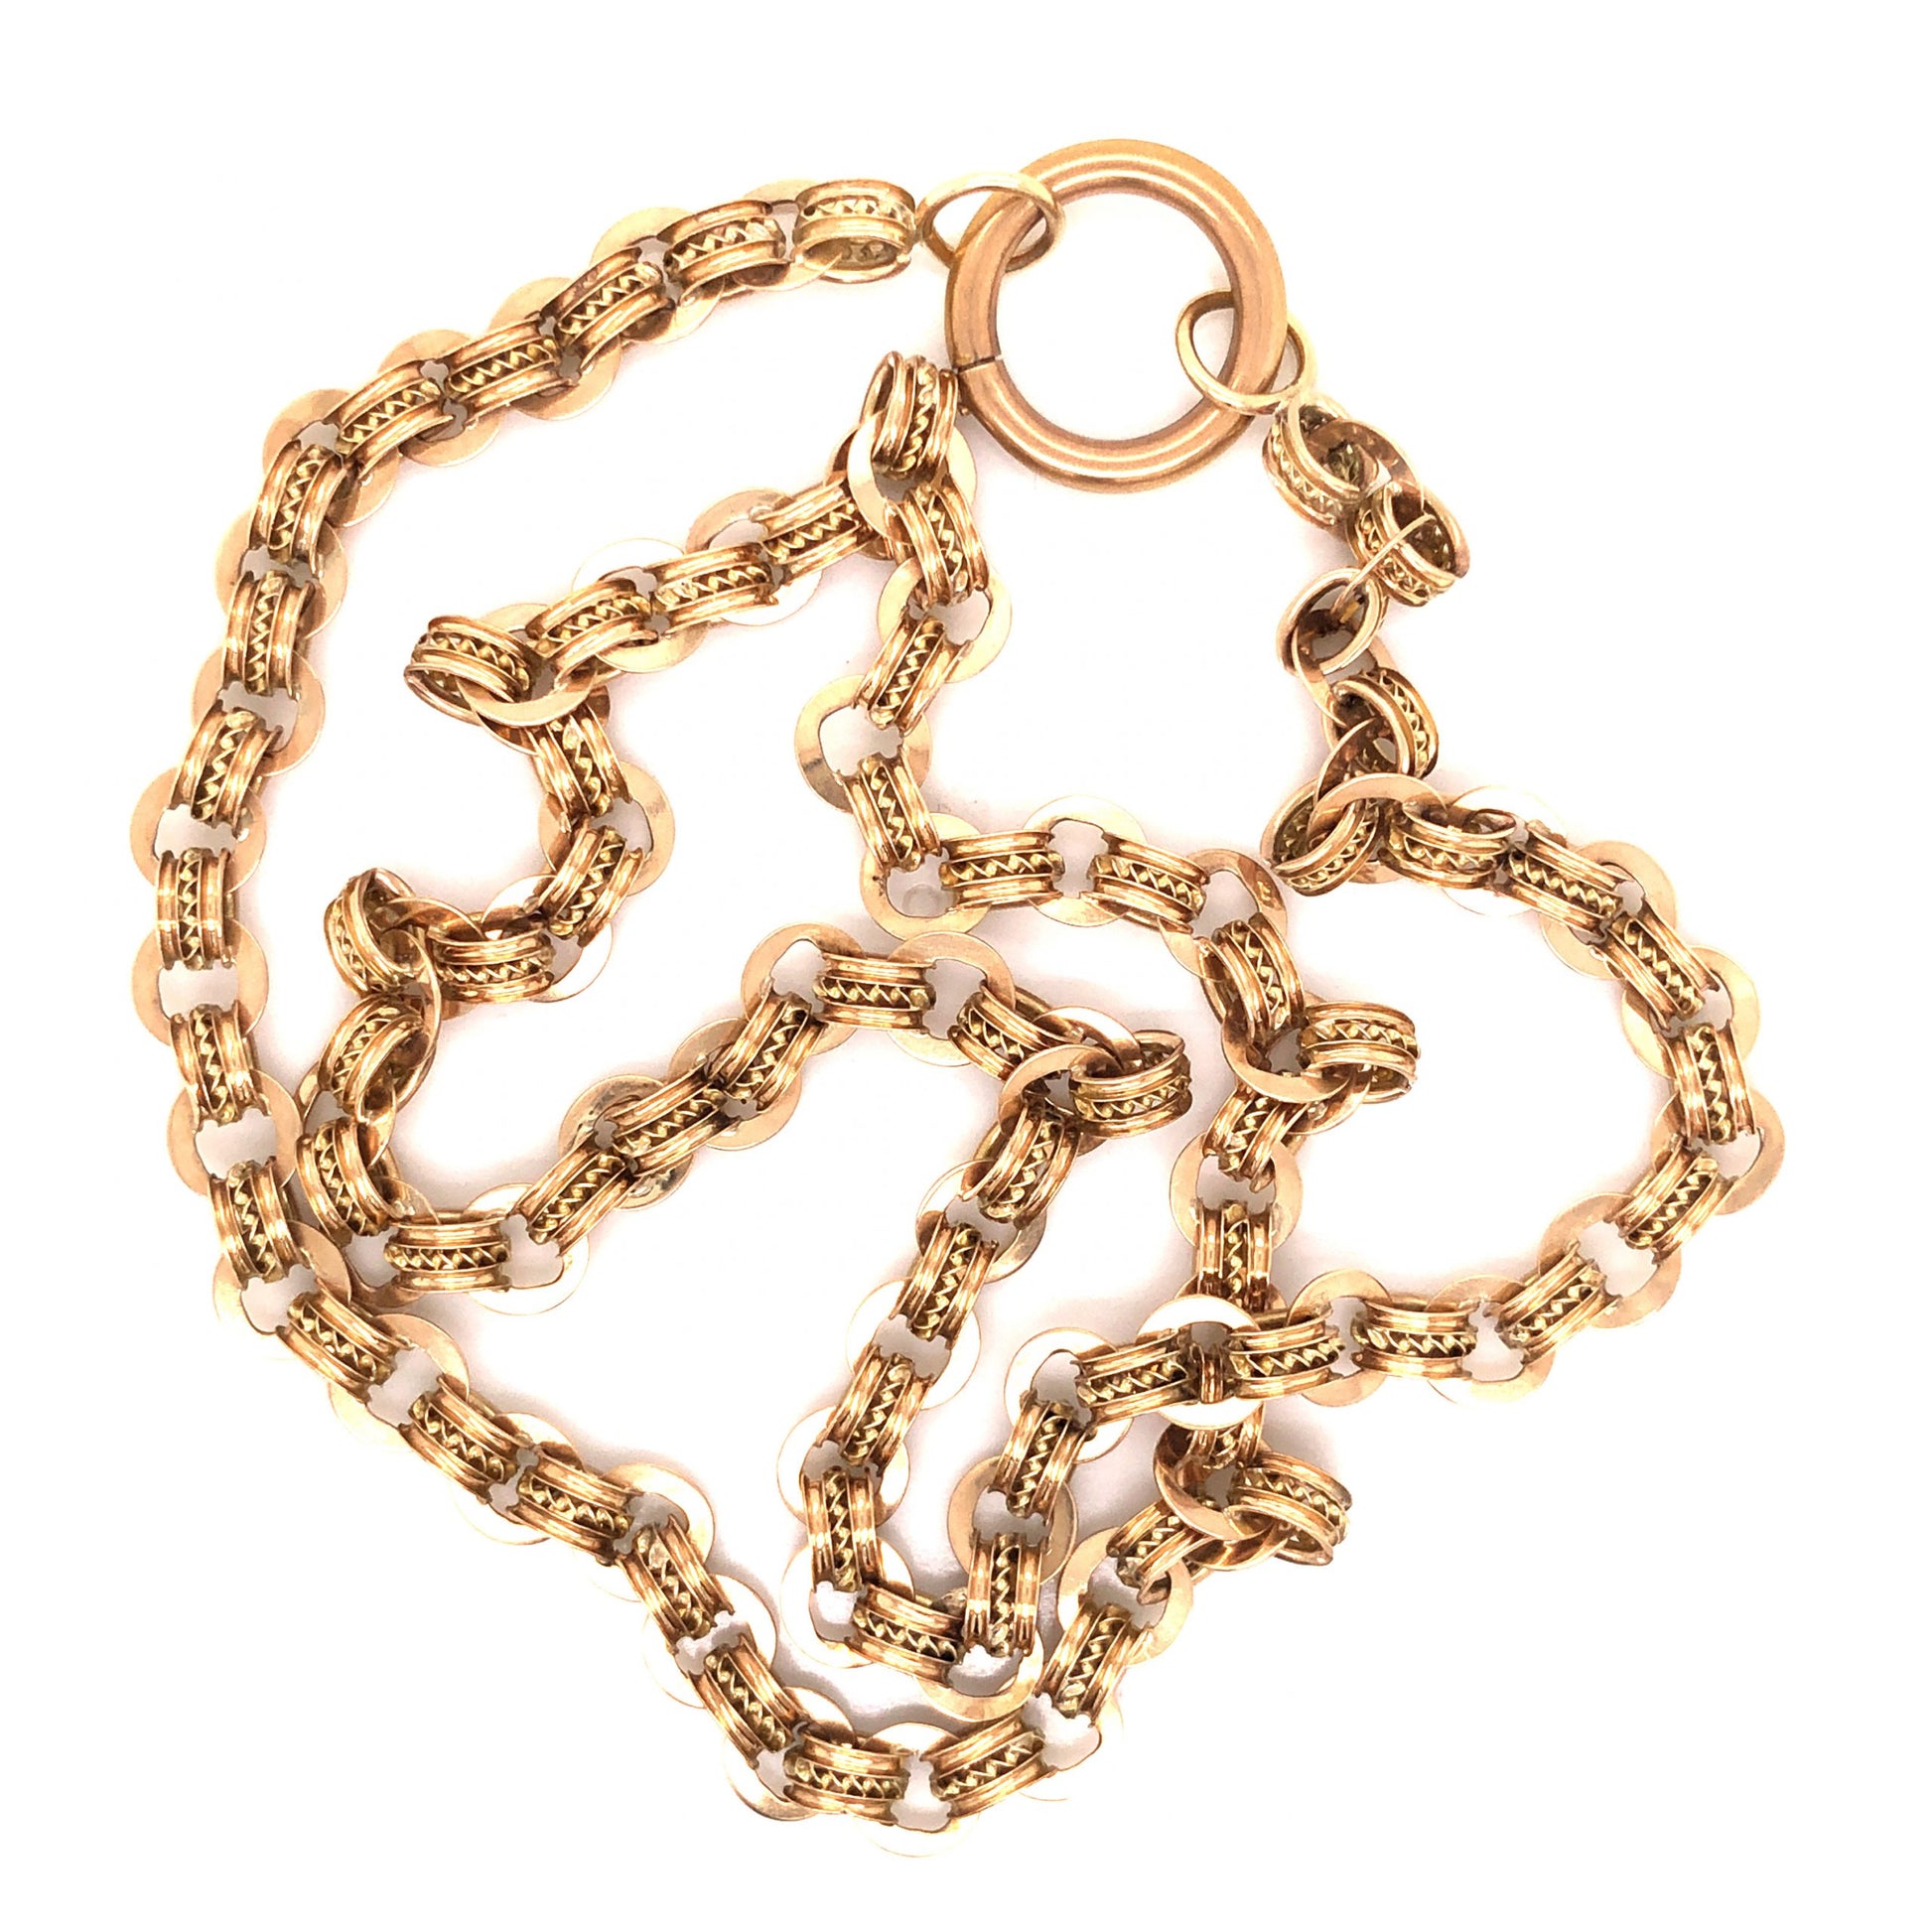 Victorian Rolo Chain Necklace in 14k Yellow Gold